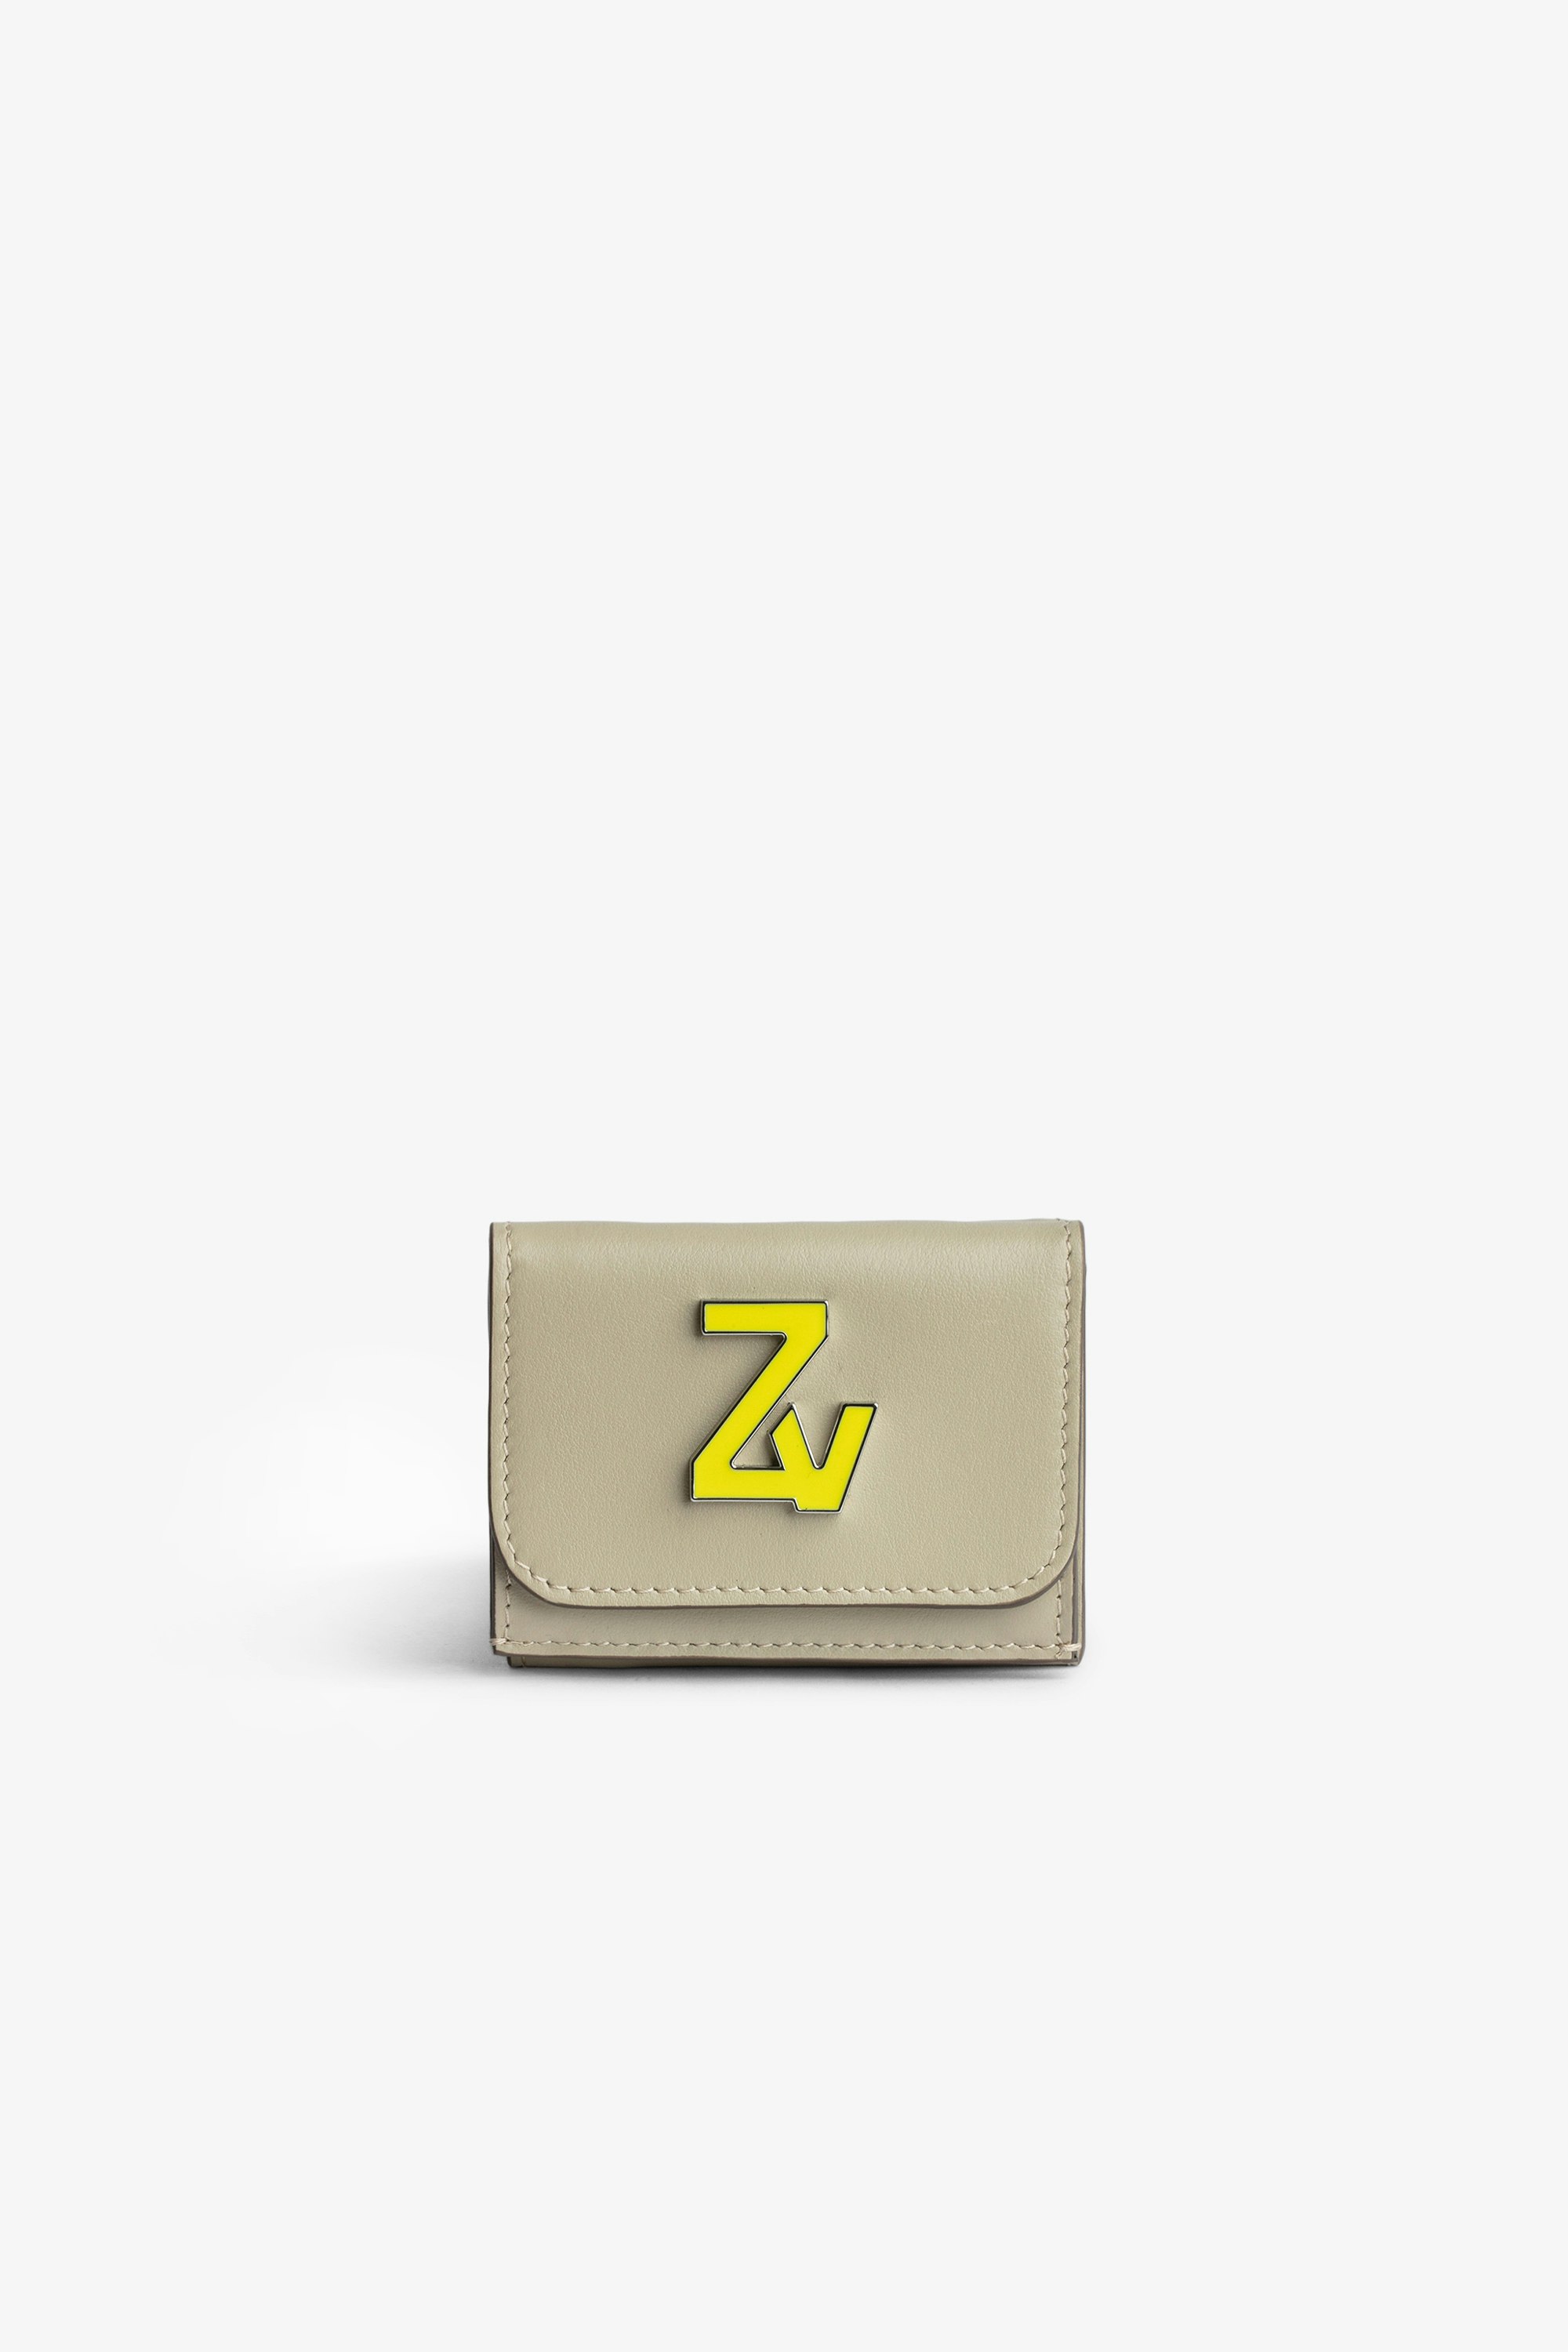 ZV Initiale Le Trifold 財布 Women’s small wallet in beige smooth leather with yellow ZV